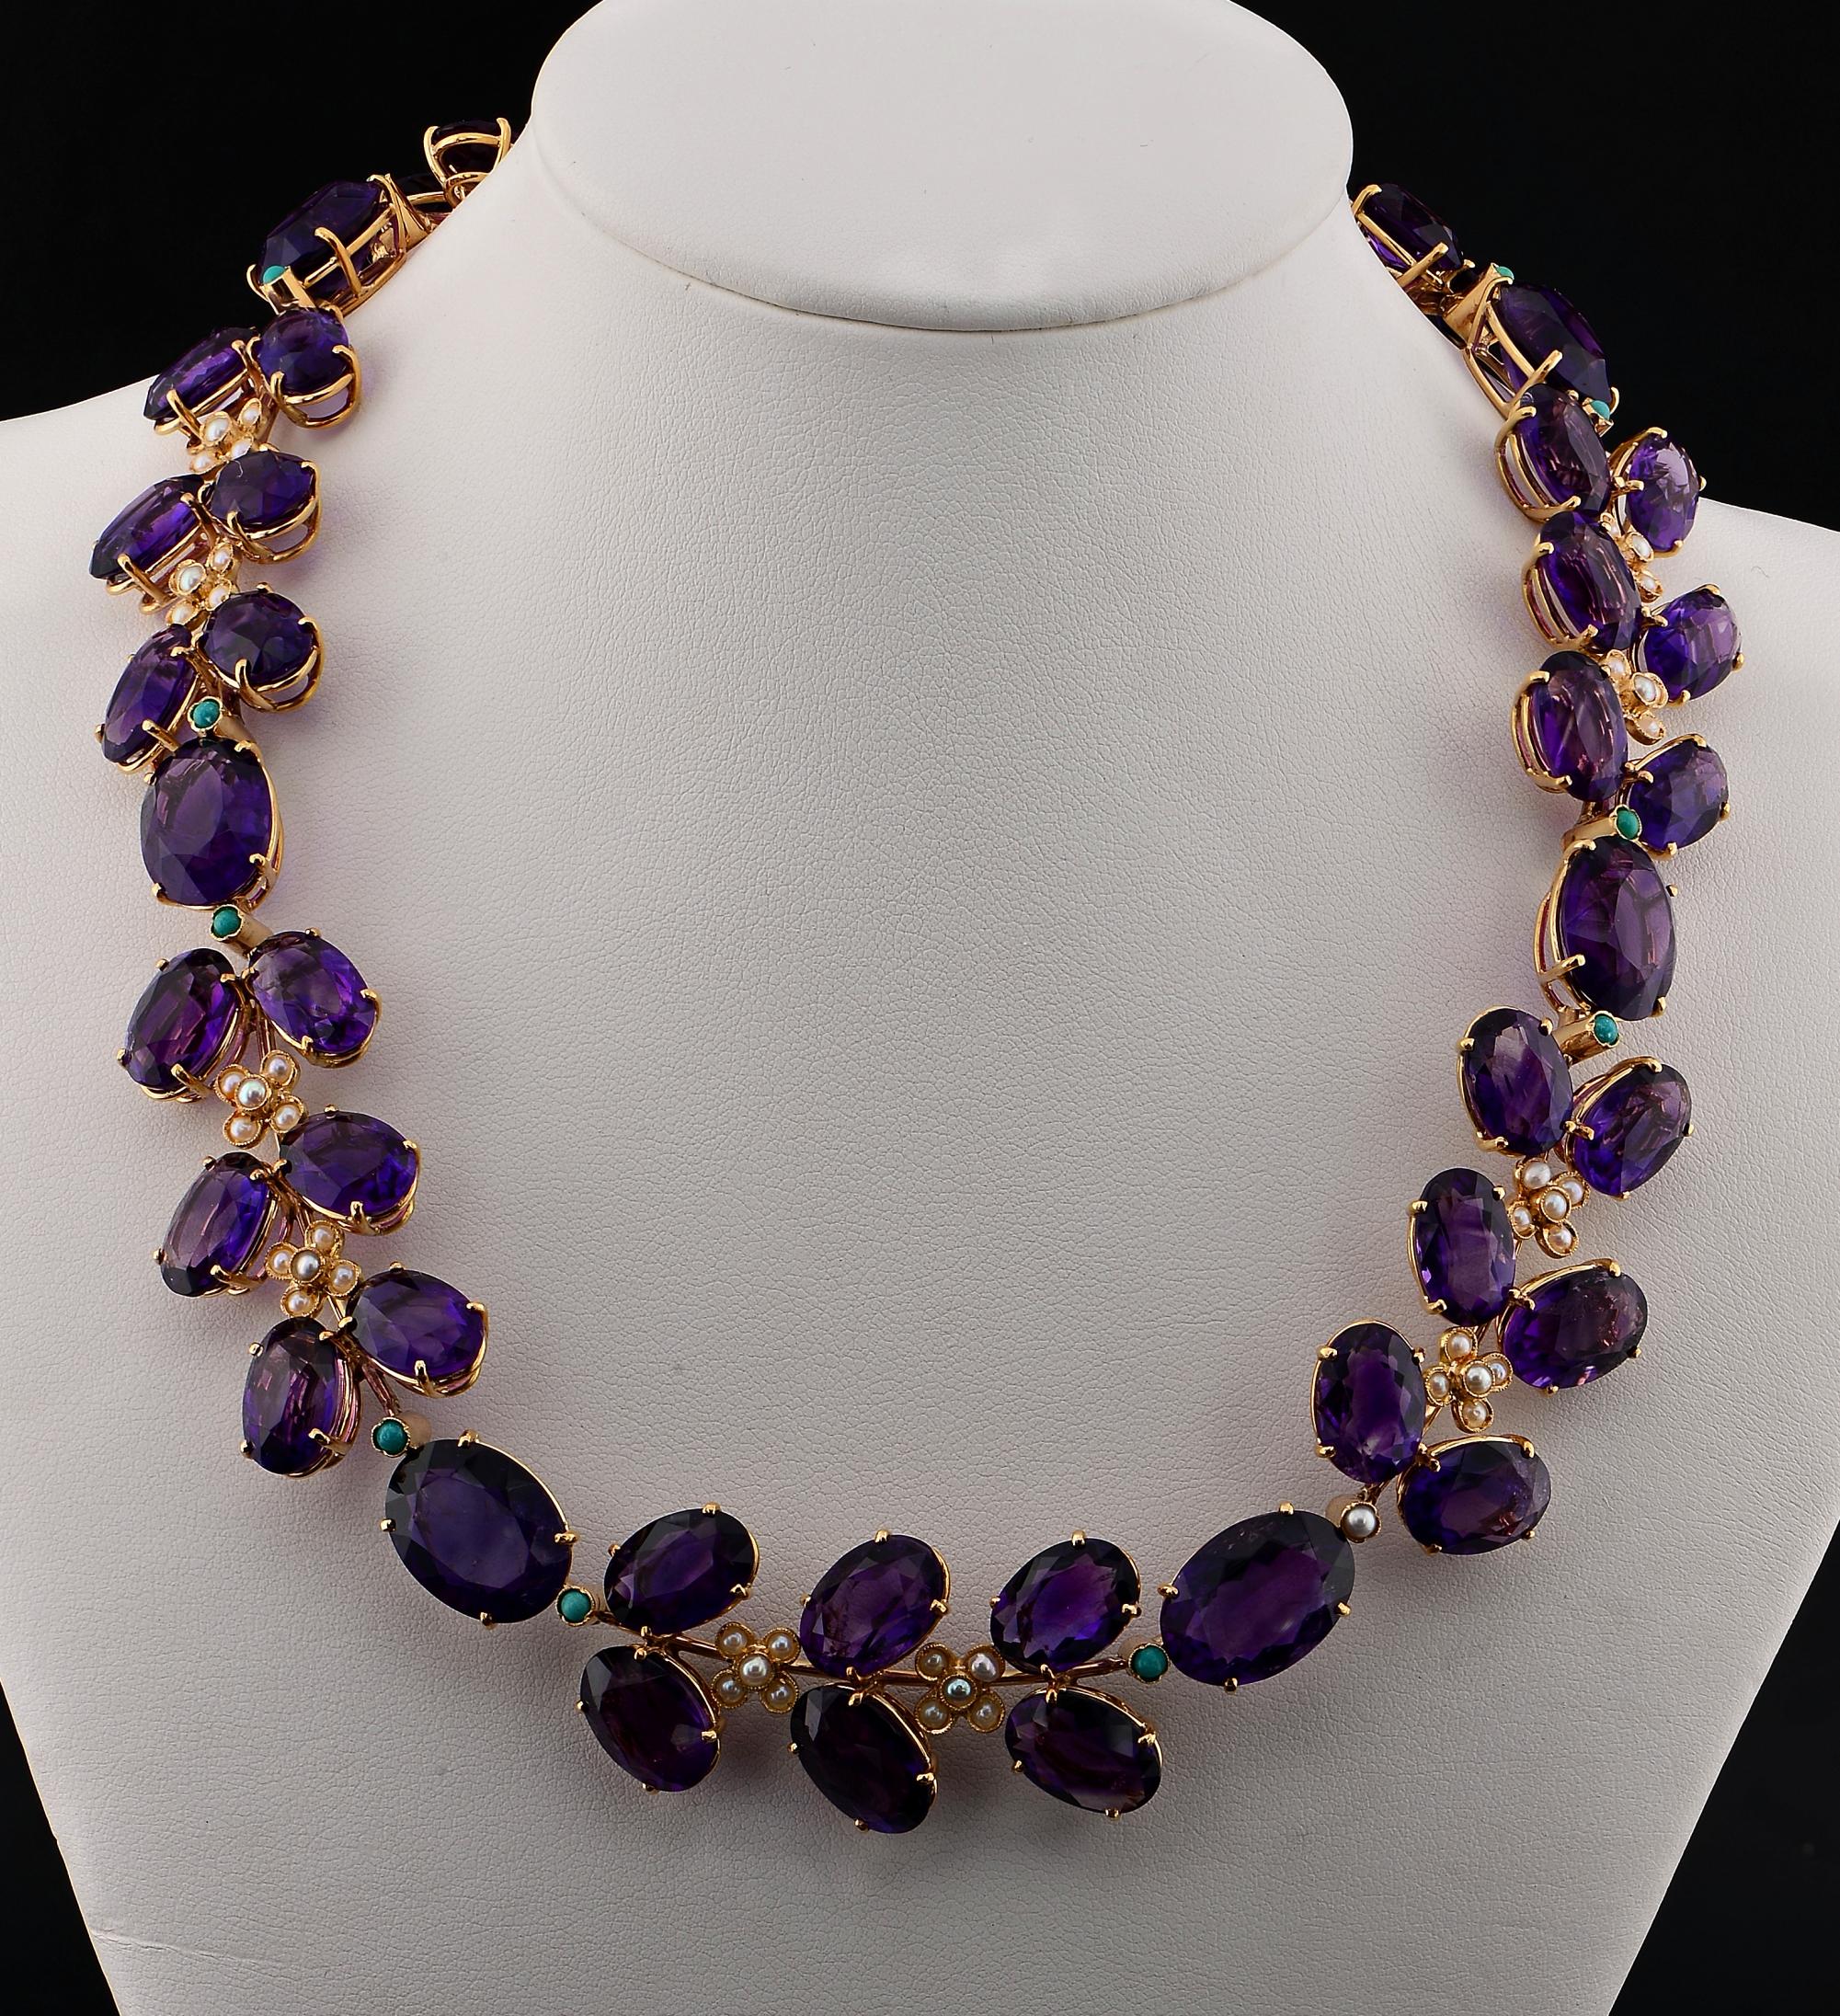 Mad for Amethysts!
This quite breathtaking vintage necklace is 1940 ca
Hand fabricated of solid 18 KT gold, bears the old Italian marks for pre 1940
The outstanding nature inspired design is composed by a high quality selection of Natural Amethysts